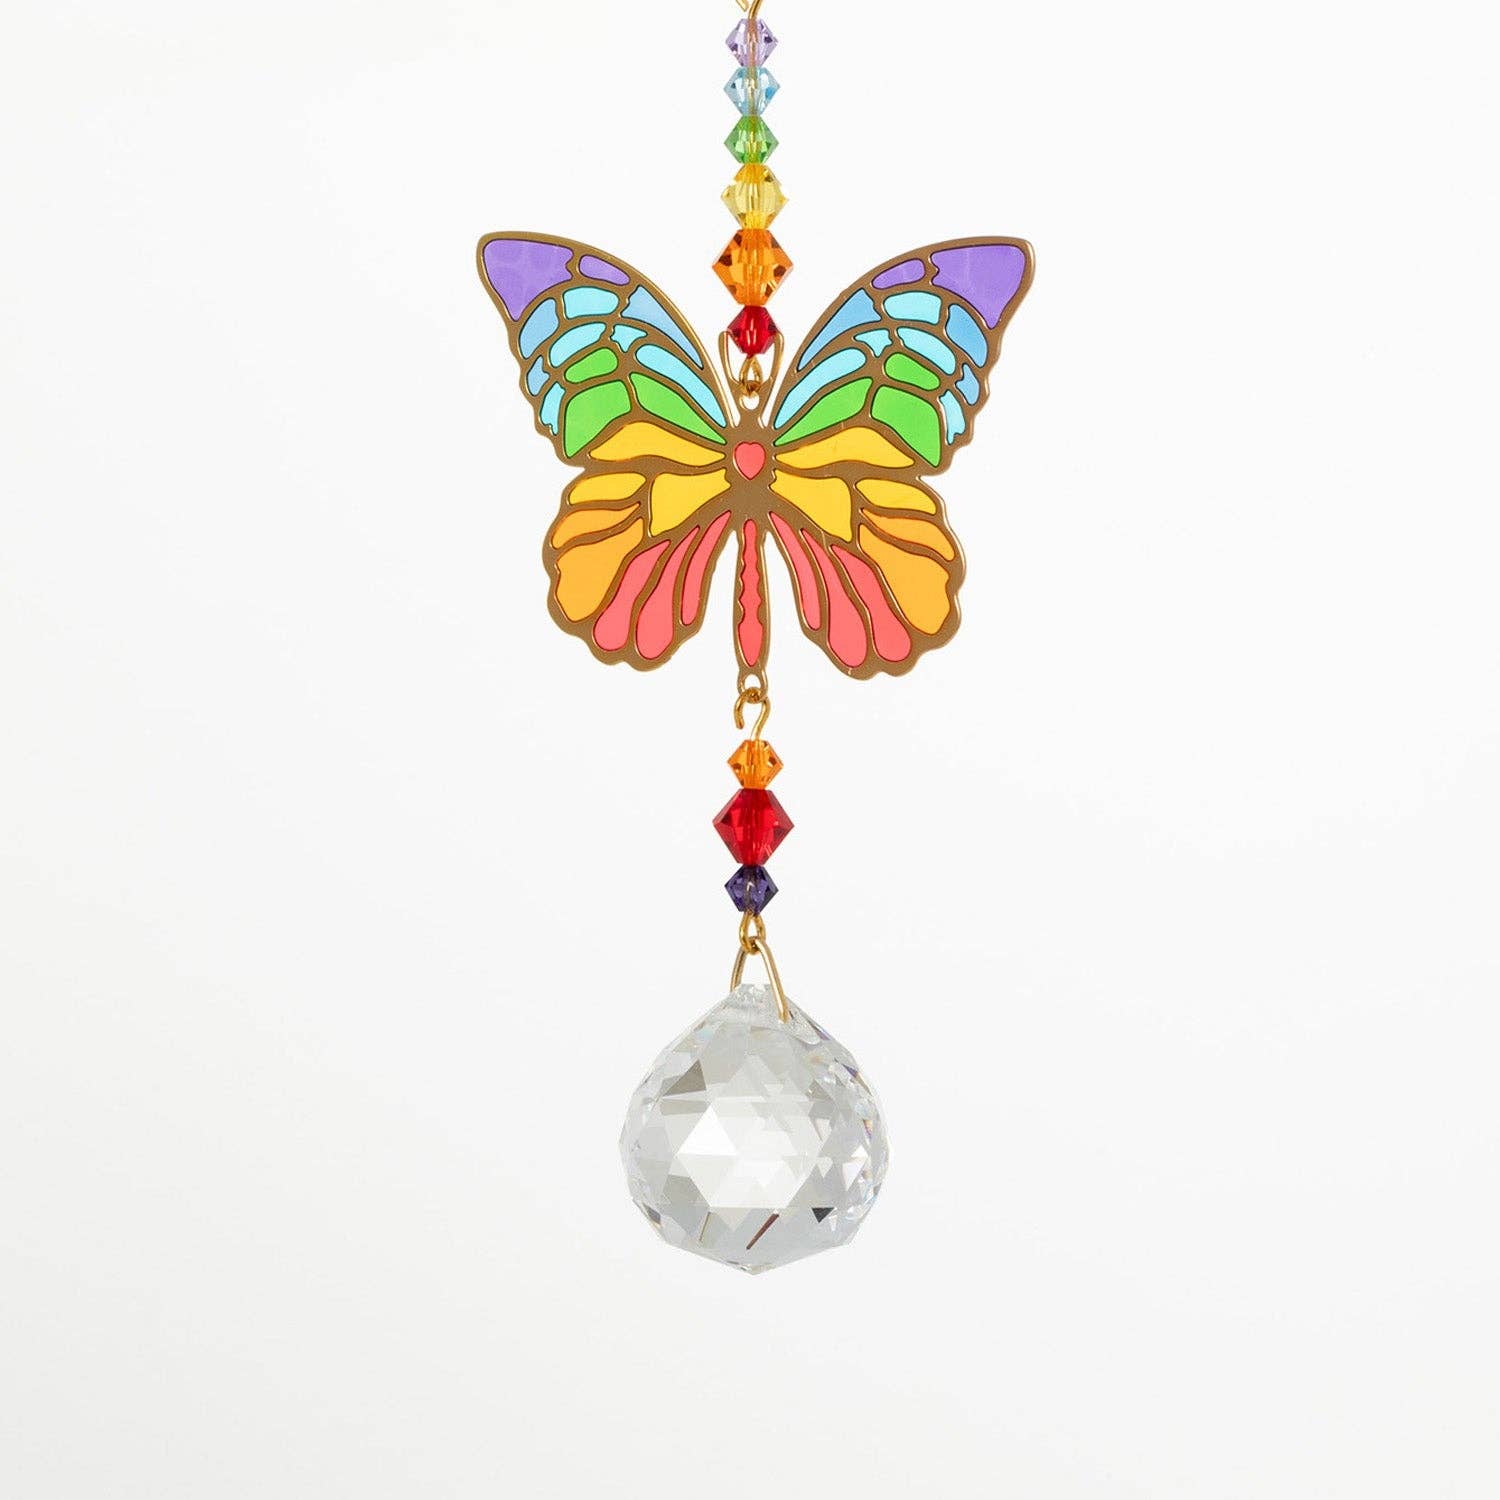 Crystal Dreams - Butterfly - Spiral Circle